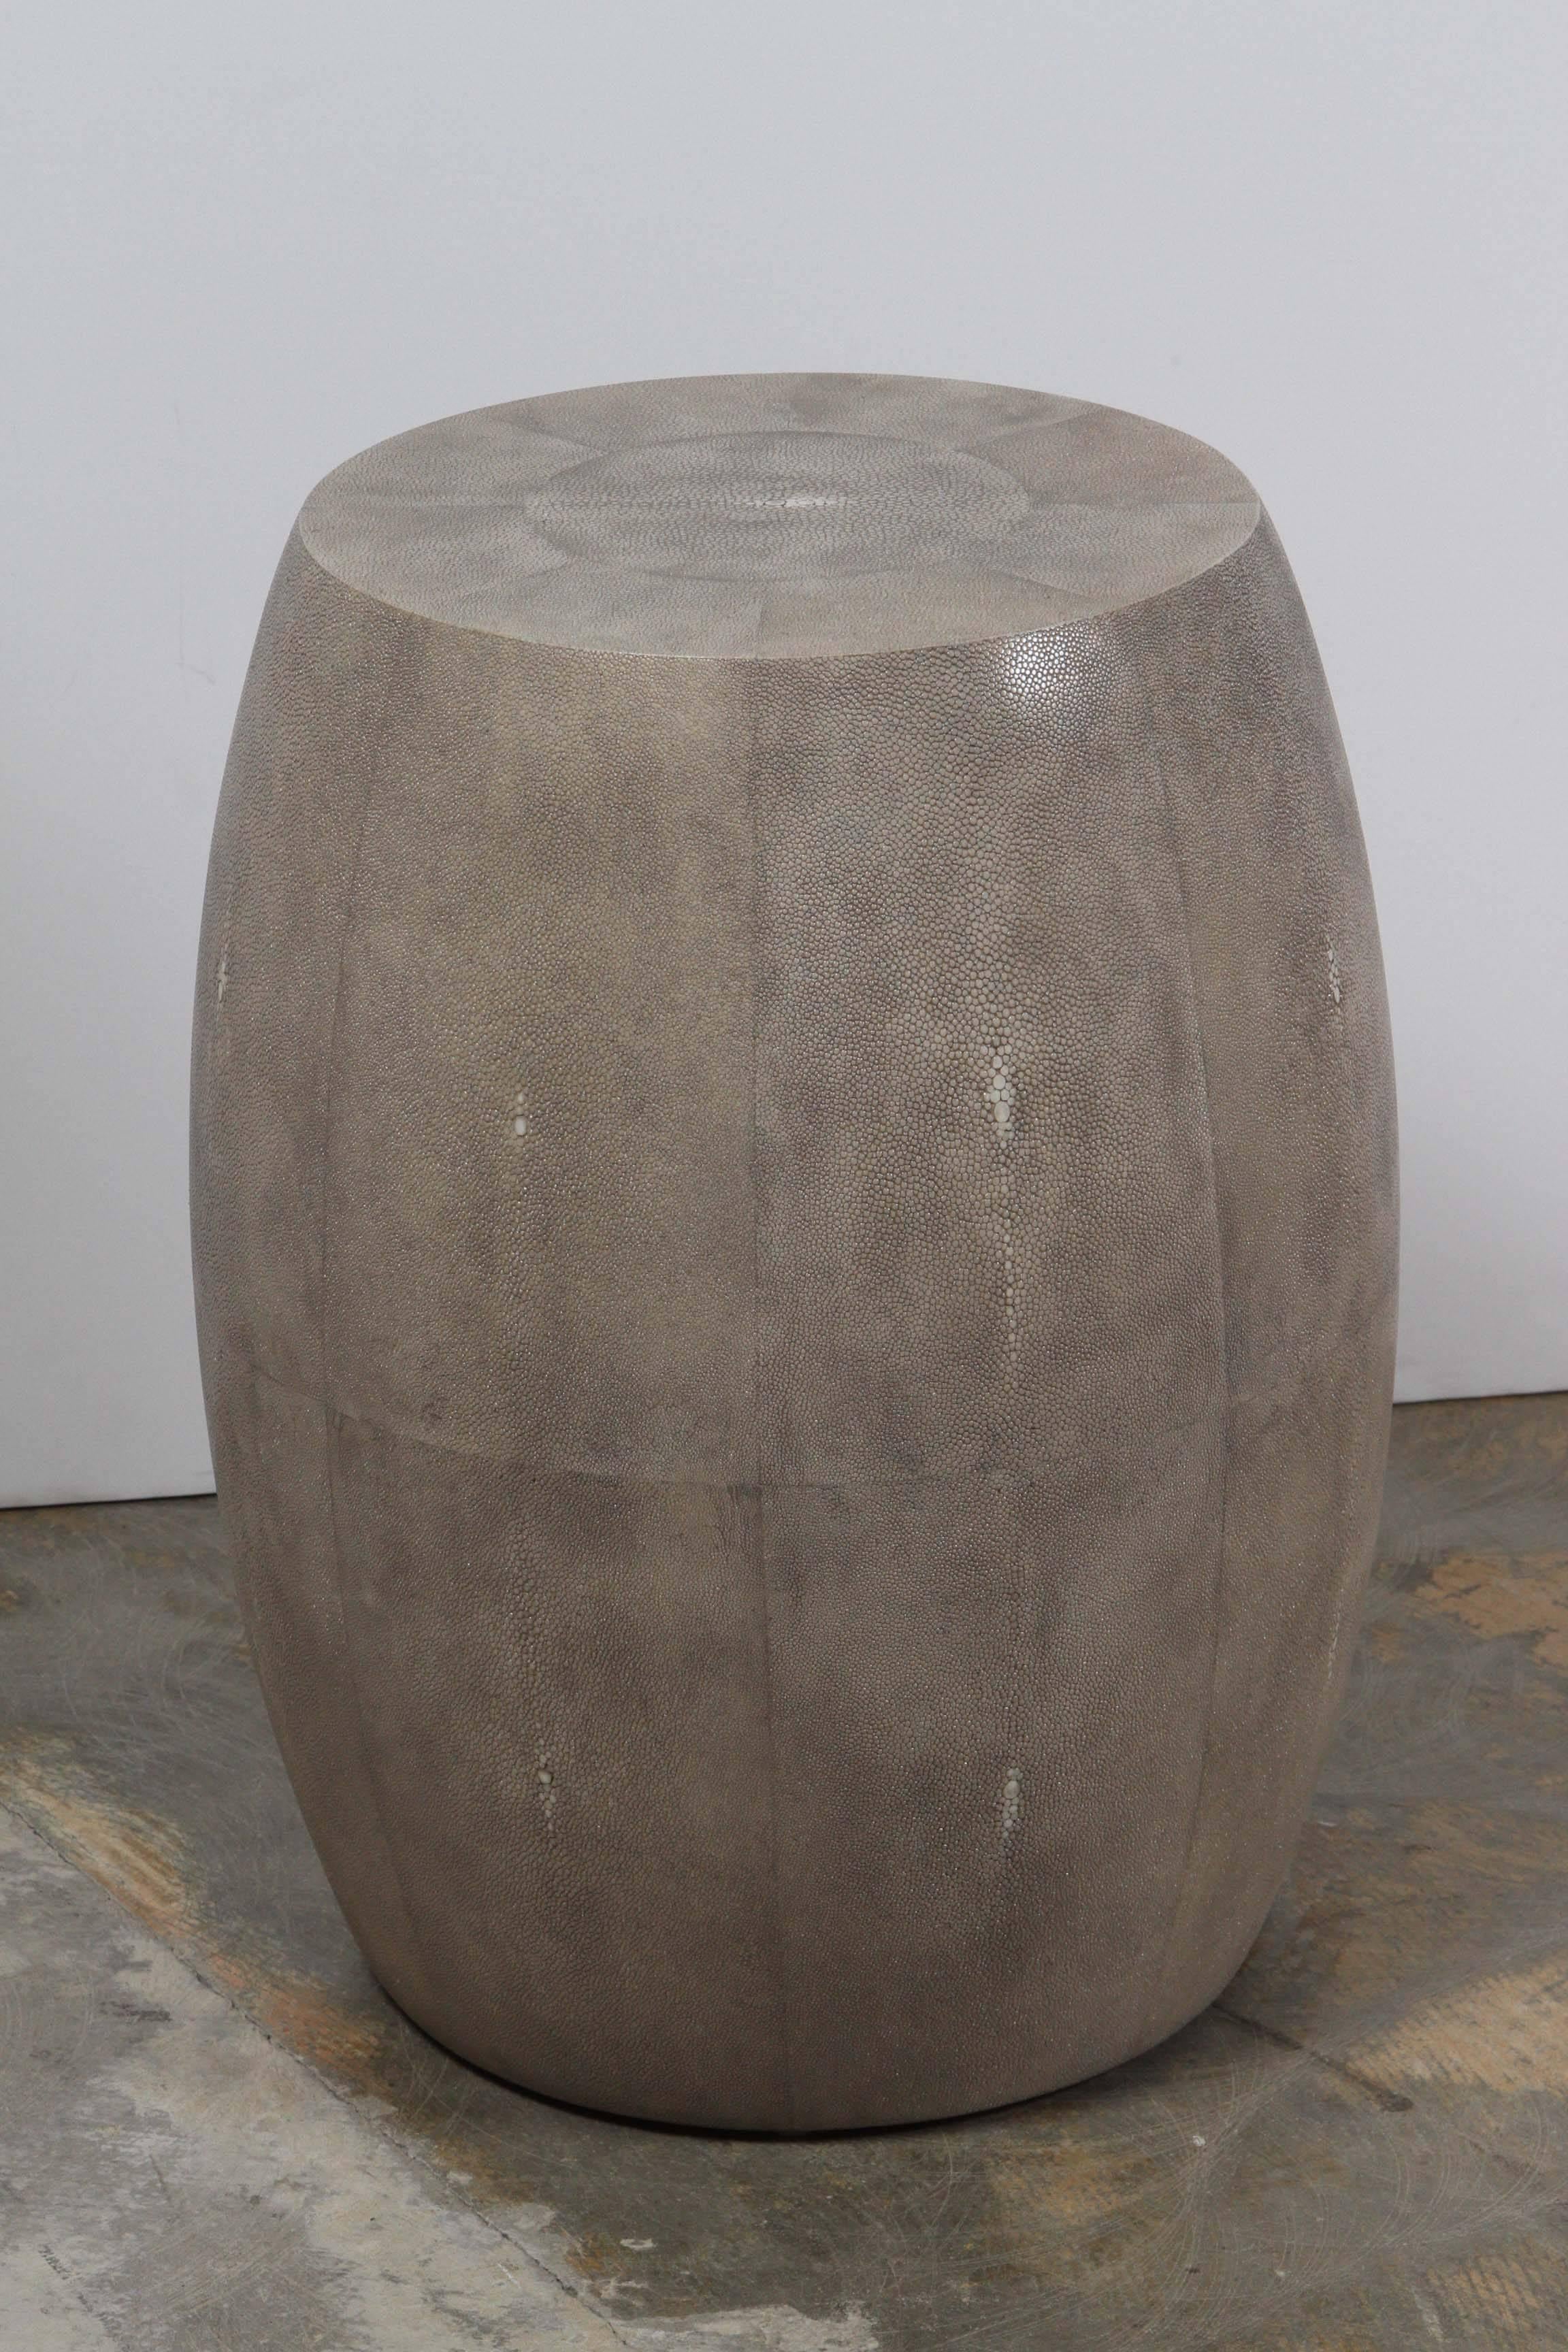 Shagreen drum tables, main photo shown pair in charcoal and other photos shown in natural cream/ivory. Can be ordered as single or mixed color pairs. The top is 12in diameter. Price quoted of $2850 is per table. By order.